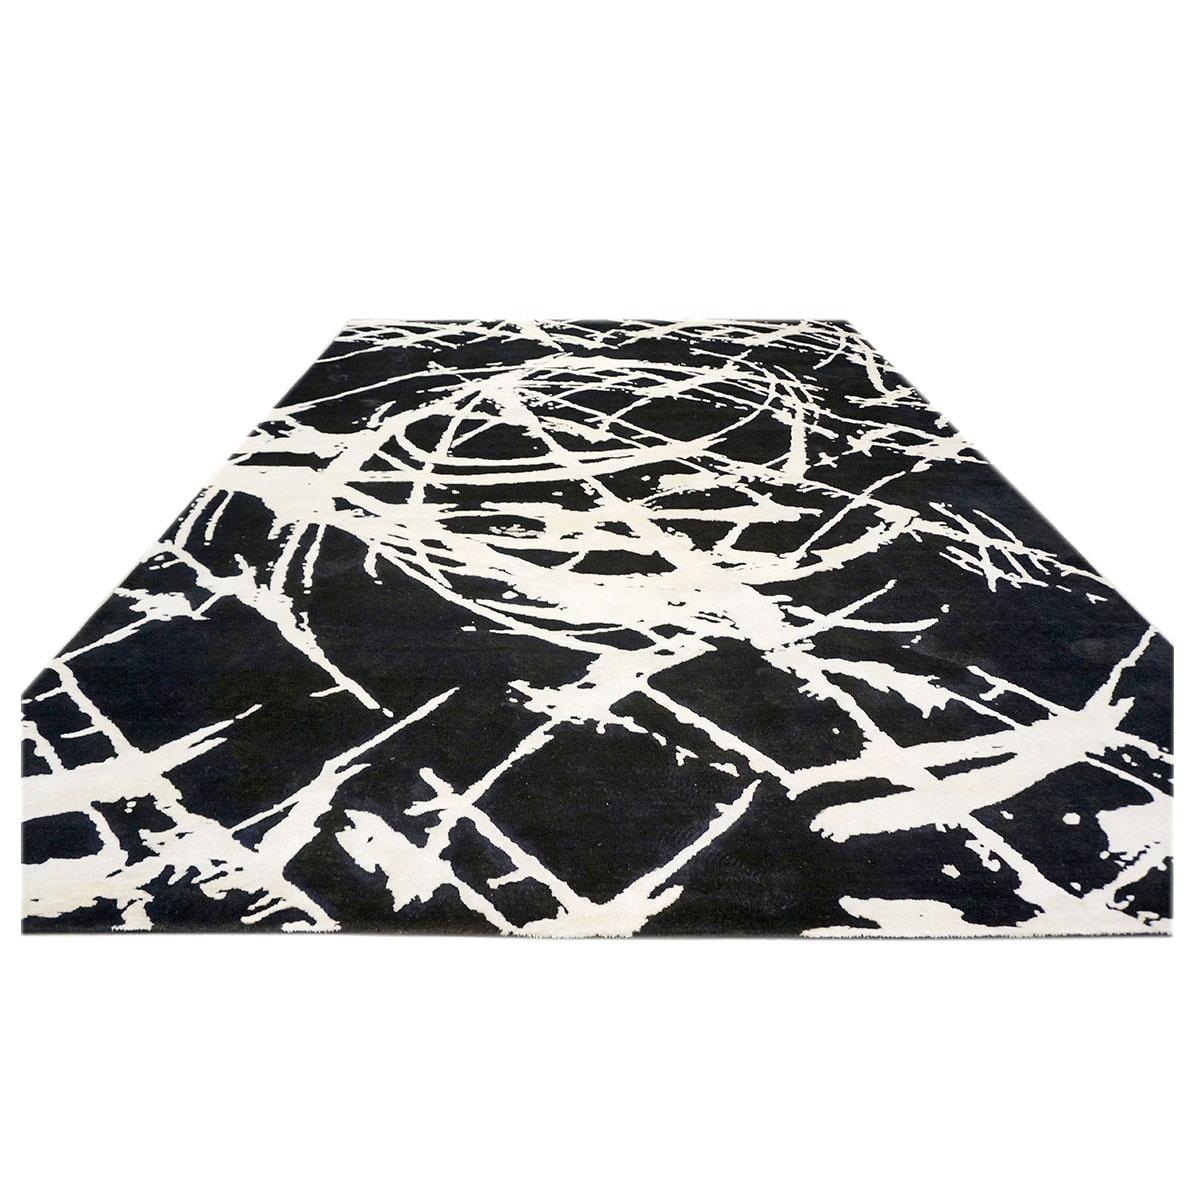 white and black rug 9x12